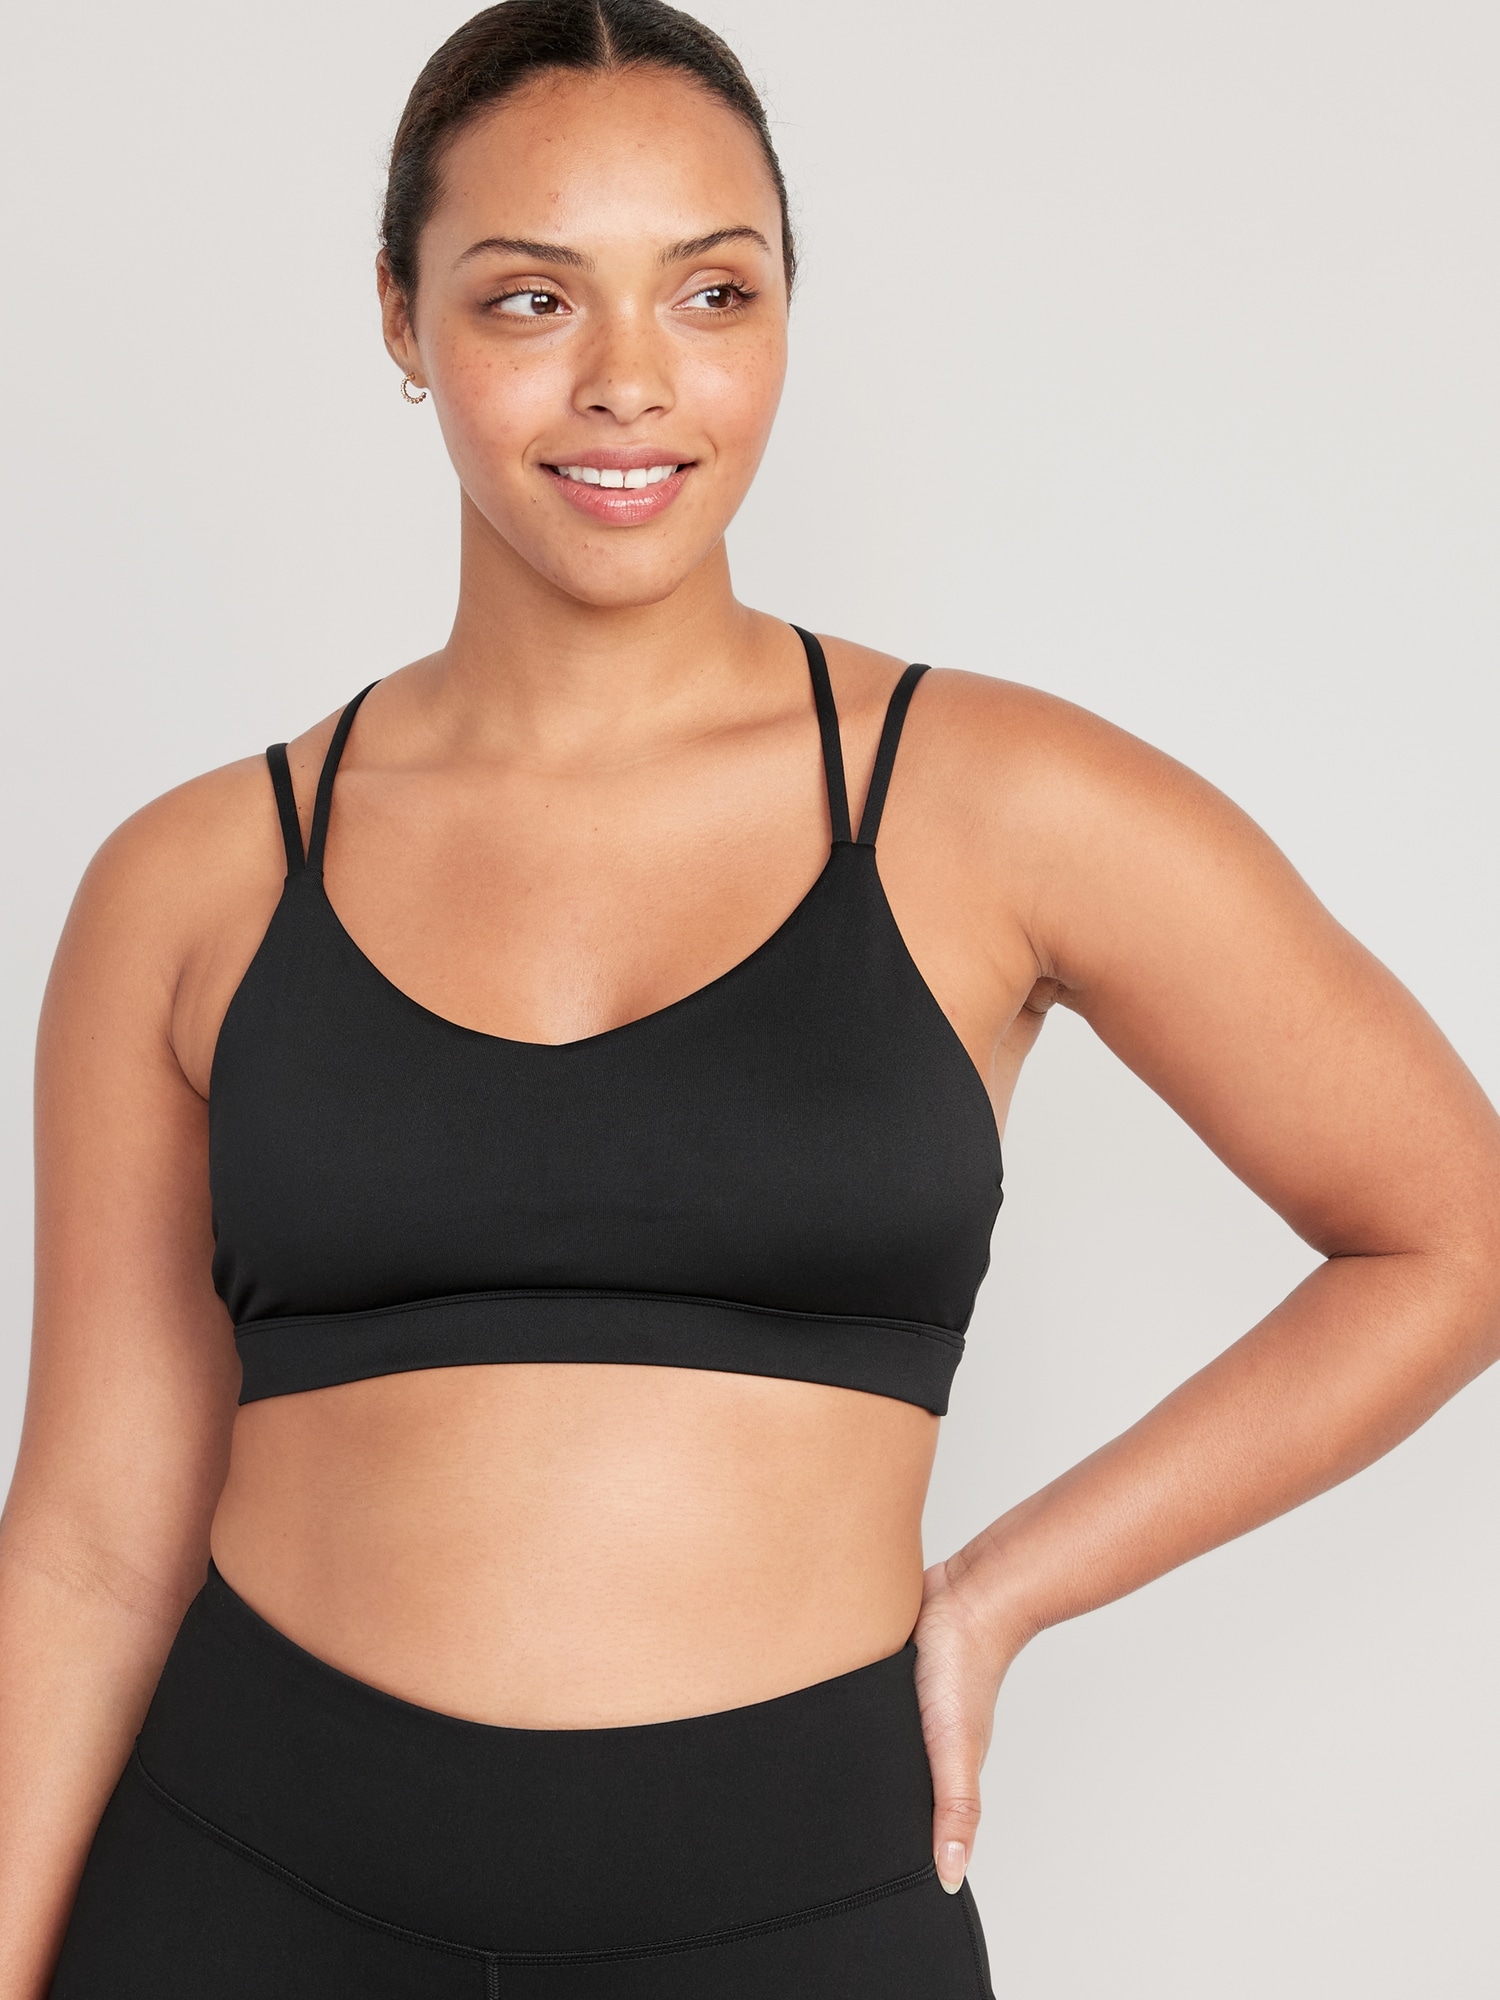 NEW Old Navy Pink Sports Bra Light Support Strappy XL